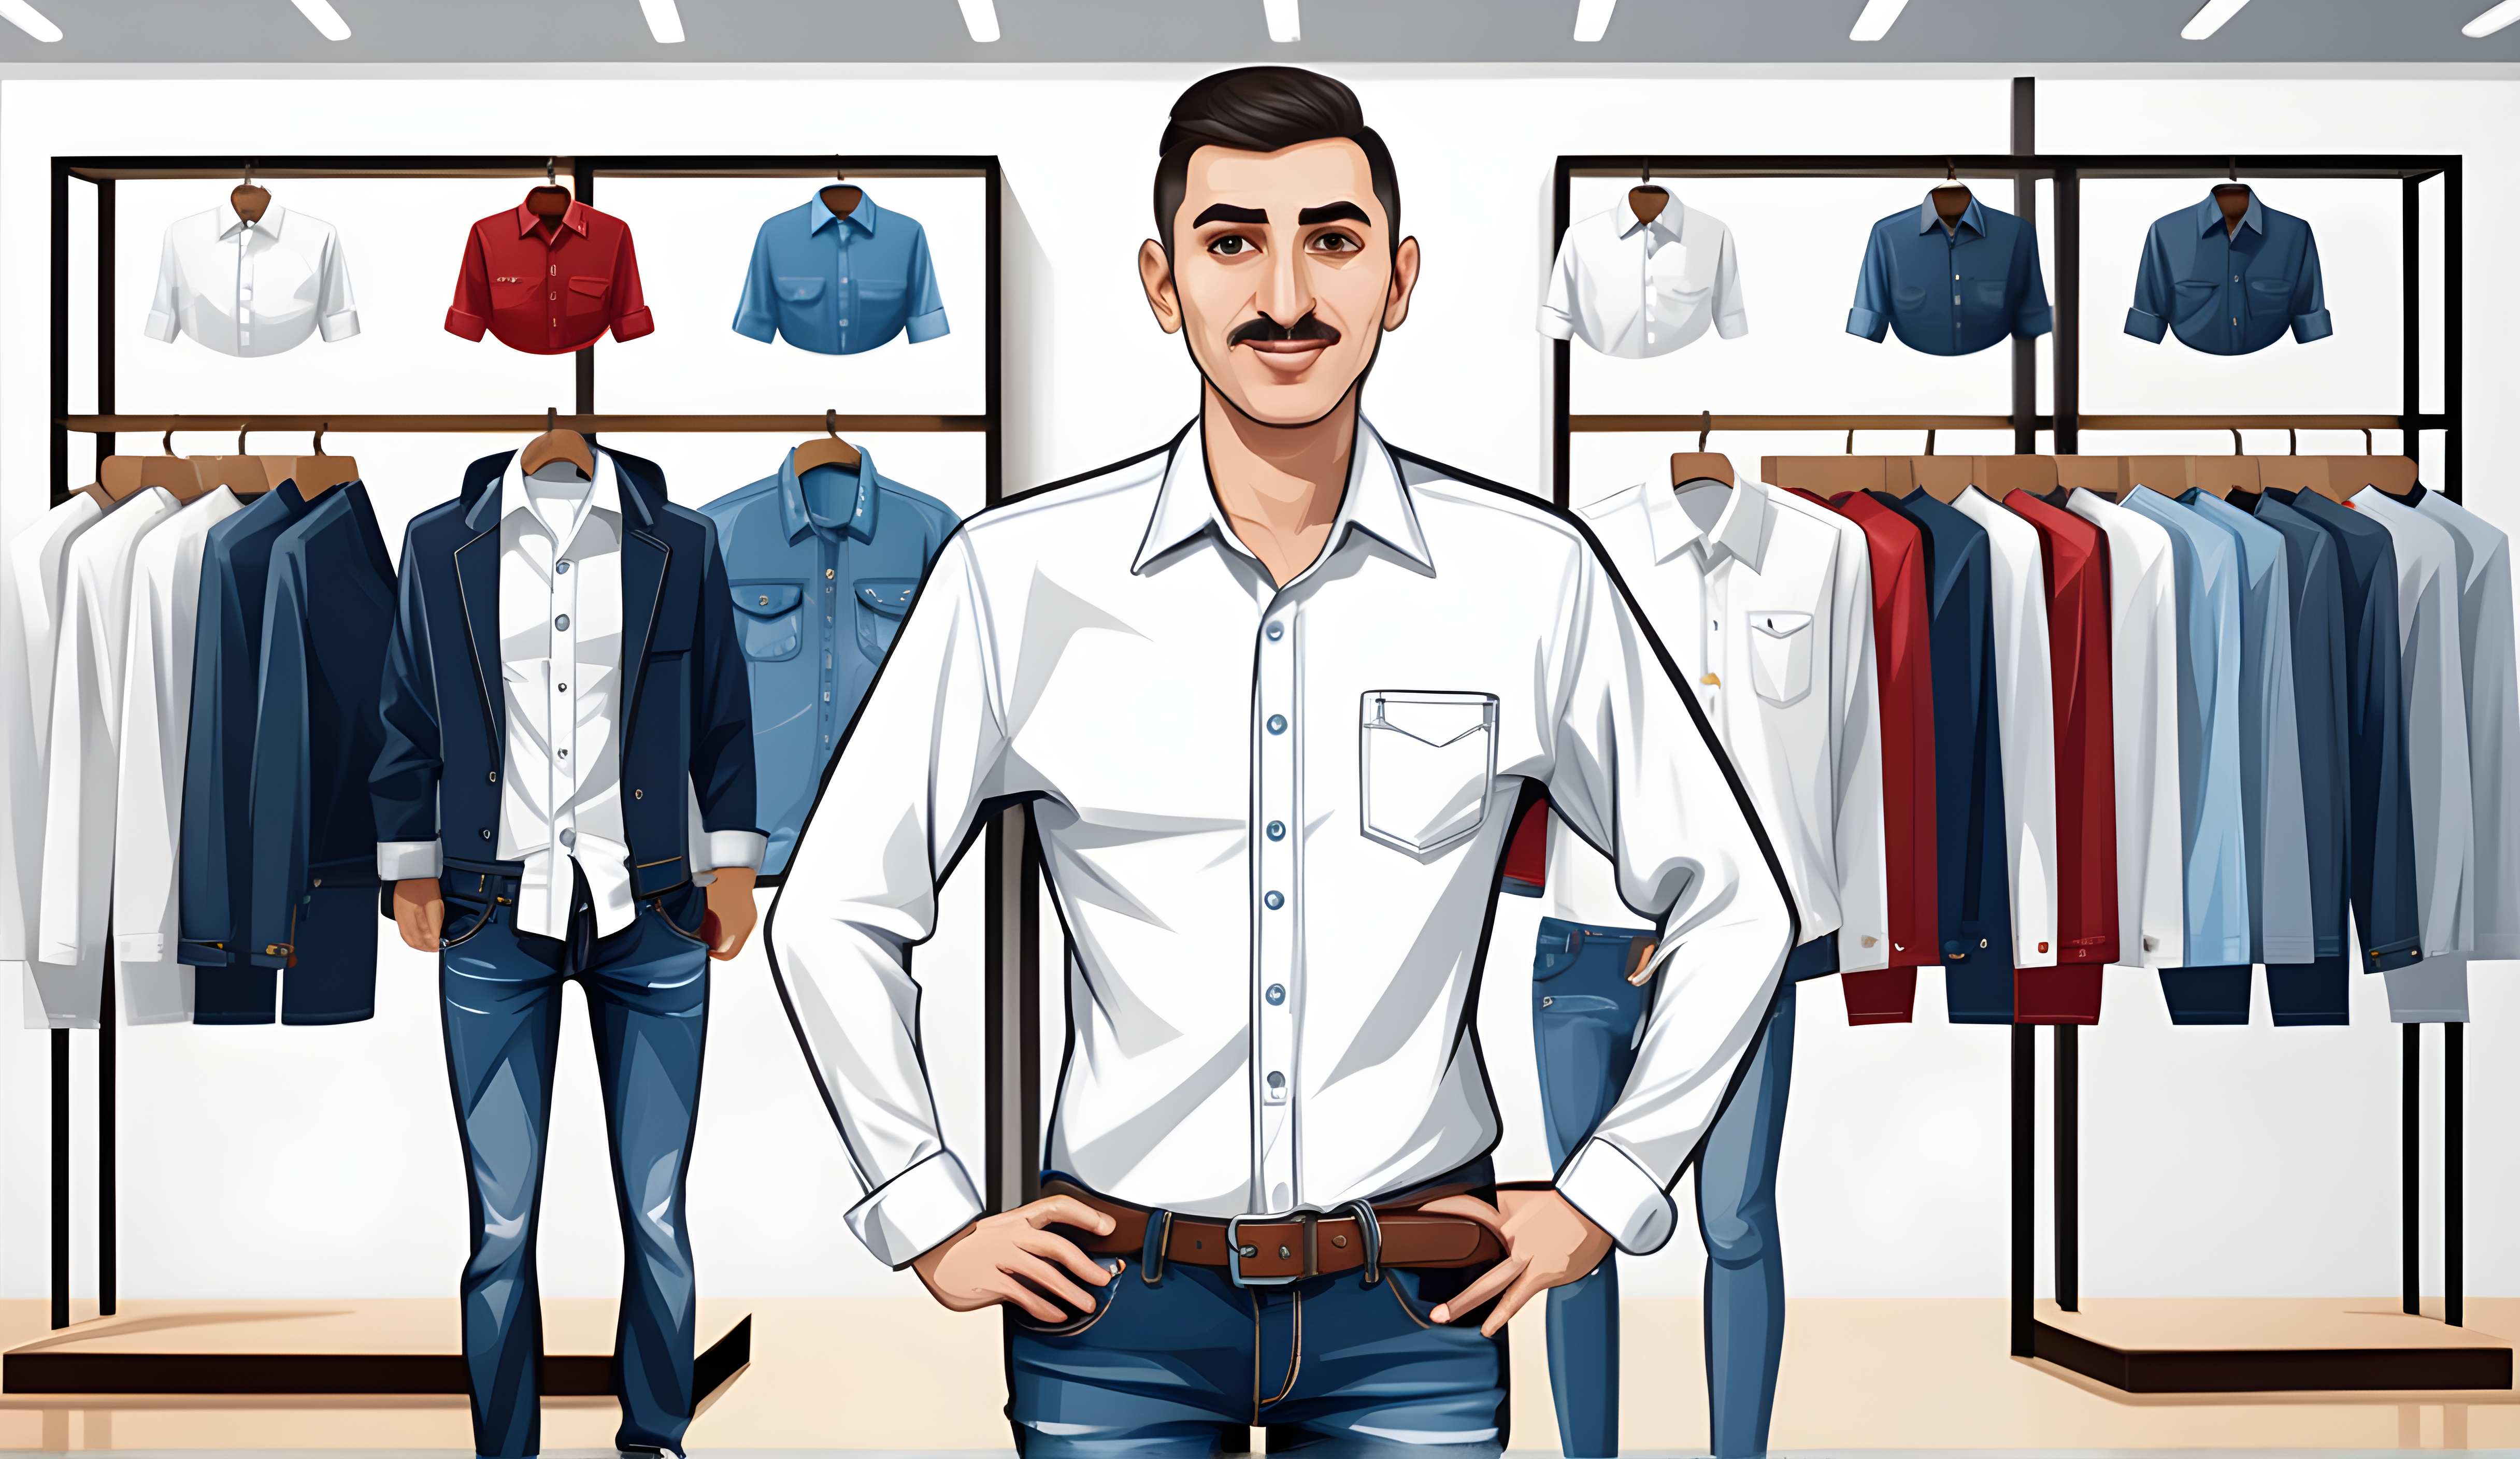 media-2d-illustration-of-azerbaijani-30-years-clothing-seller-wearing-jeans-and-white-shirt-in-clothing-st-400611